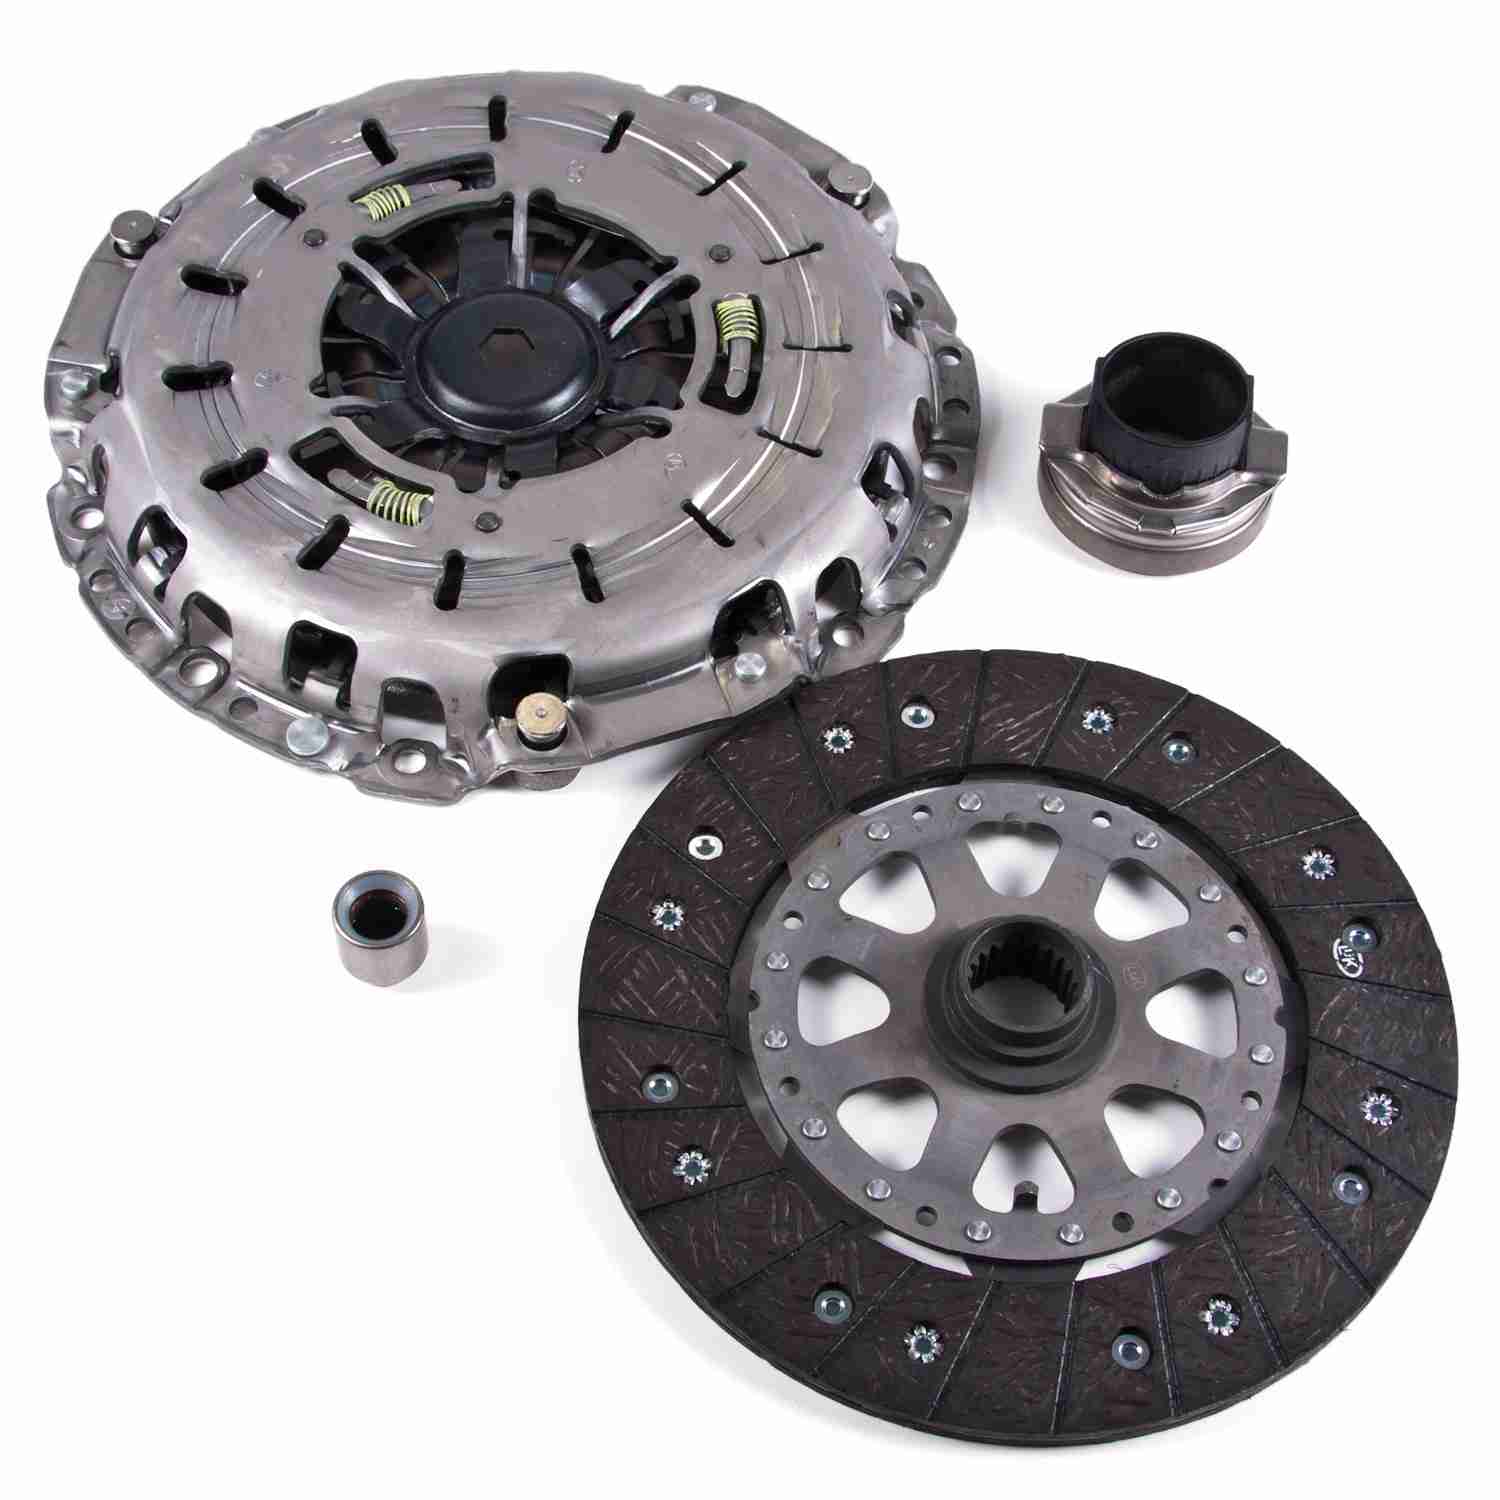 Front View of Transmission Clutch Kit LUK 03-064